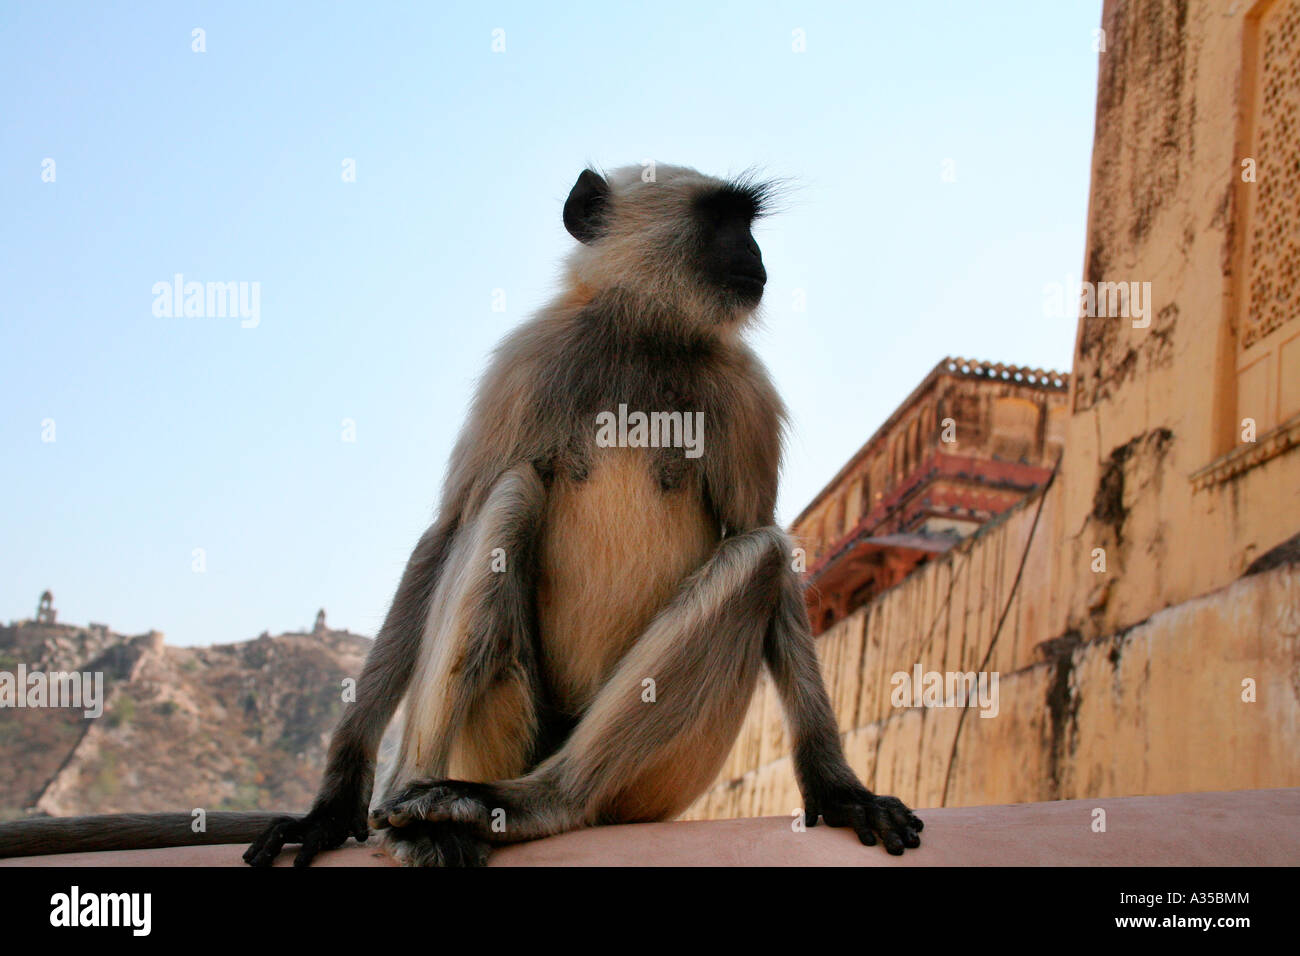 Monkey on the wall of Amber Fort, Jaipur, Rajasthan, India Stock Photo